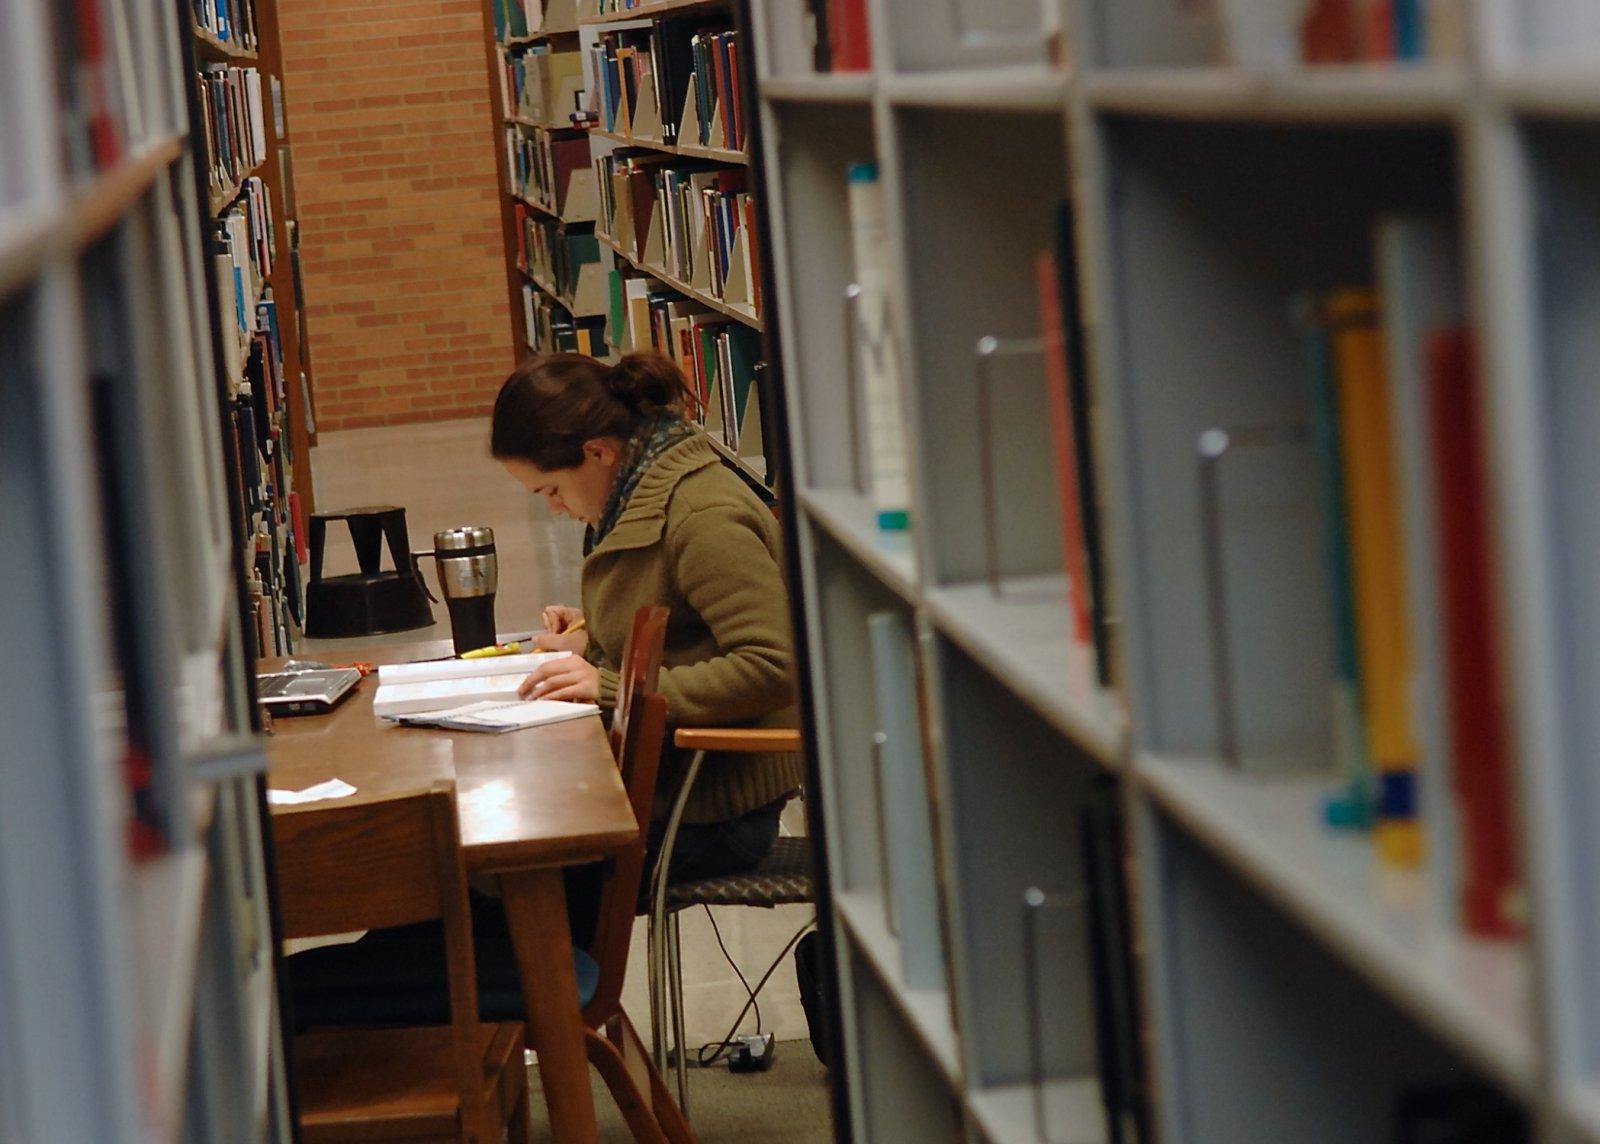 Student Studying in the Library